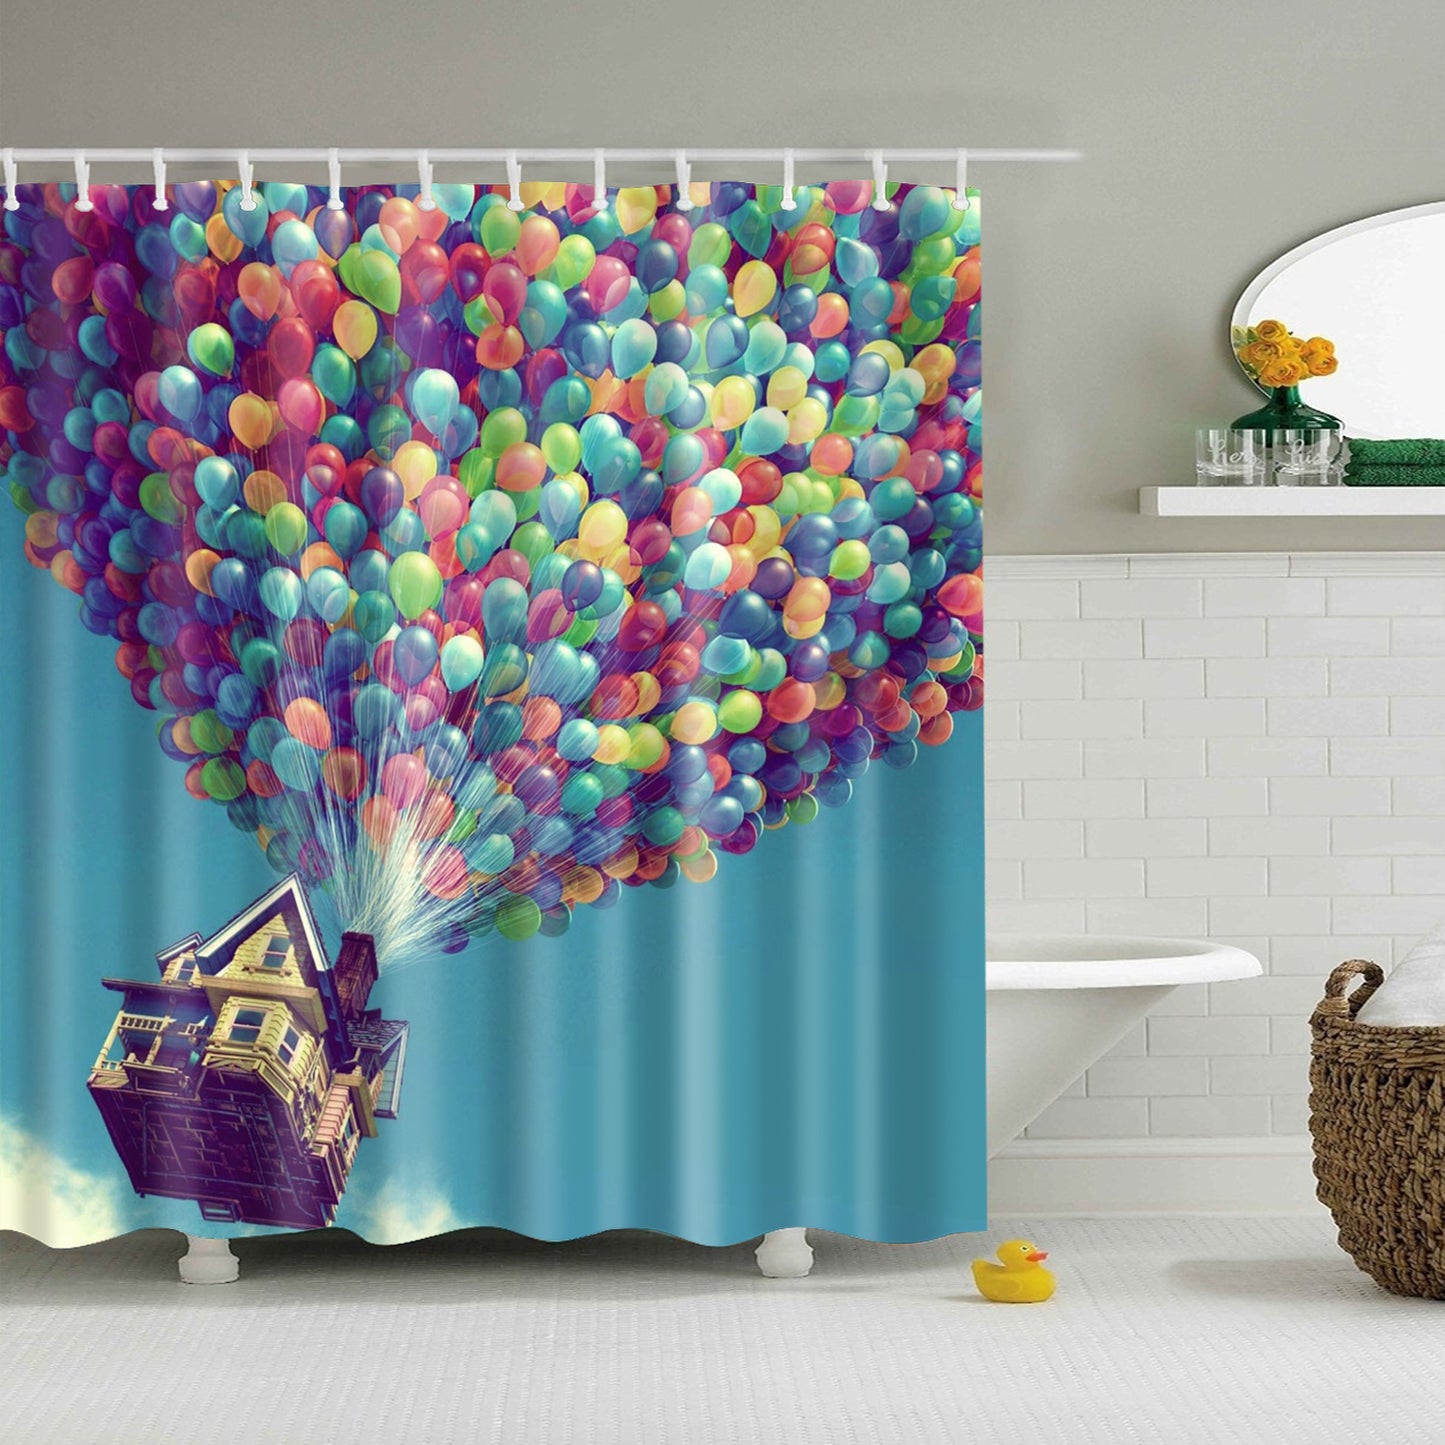 Blue Sky Carrying Lodge Colorful Air Balloons Shower Curtain